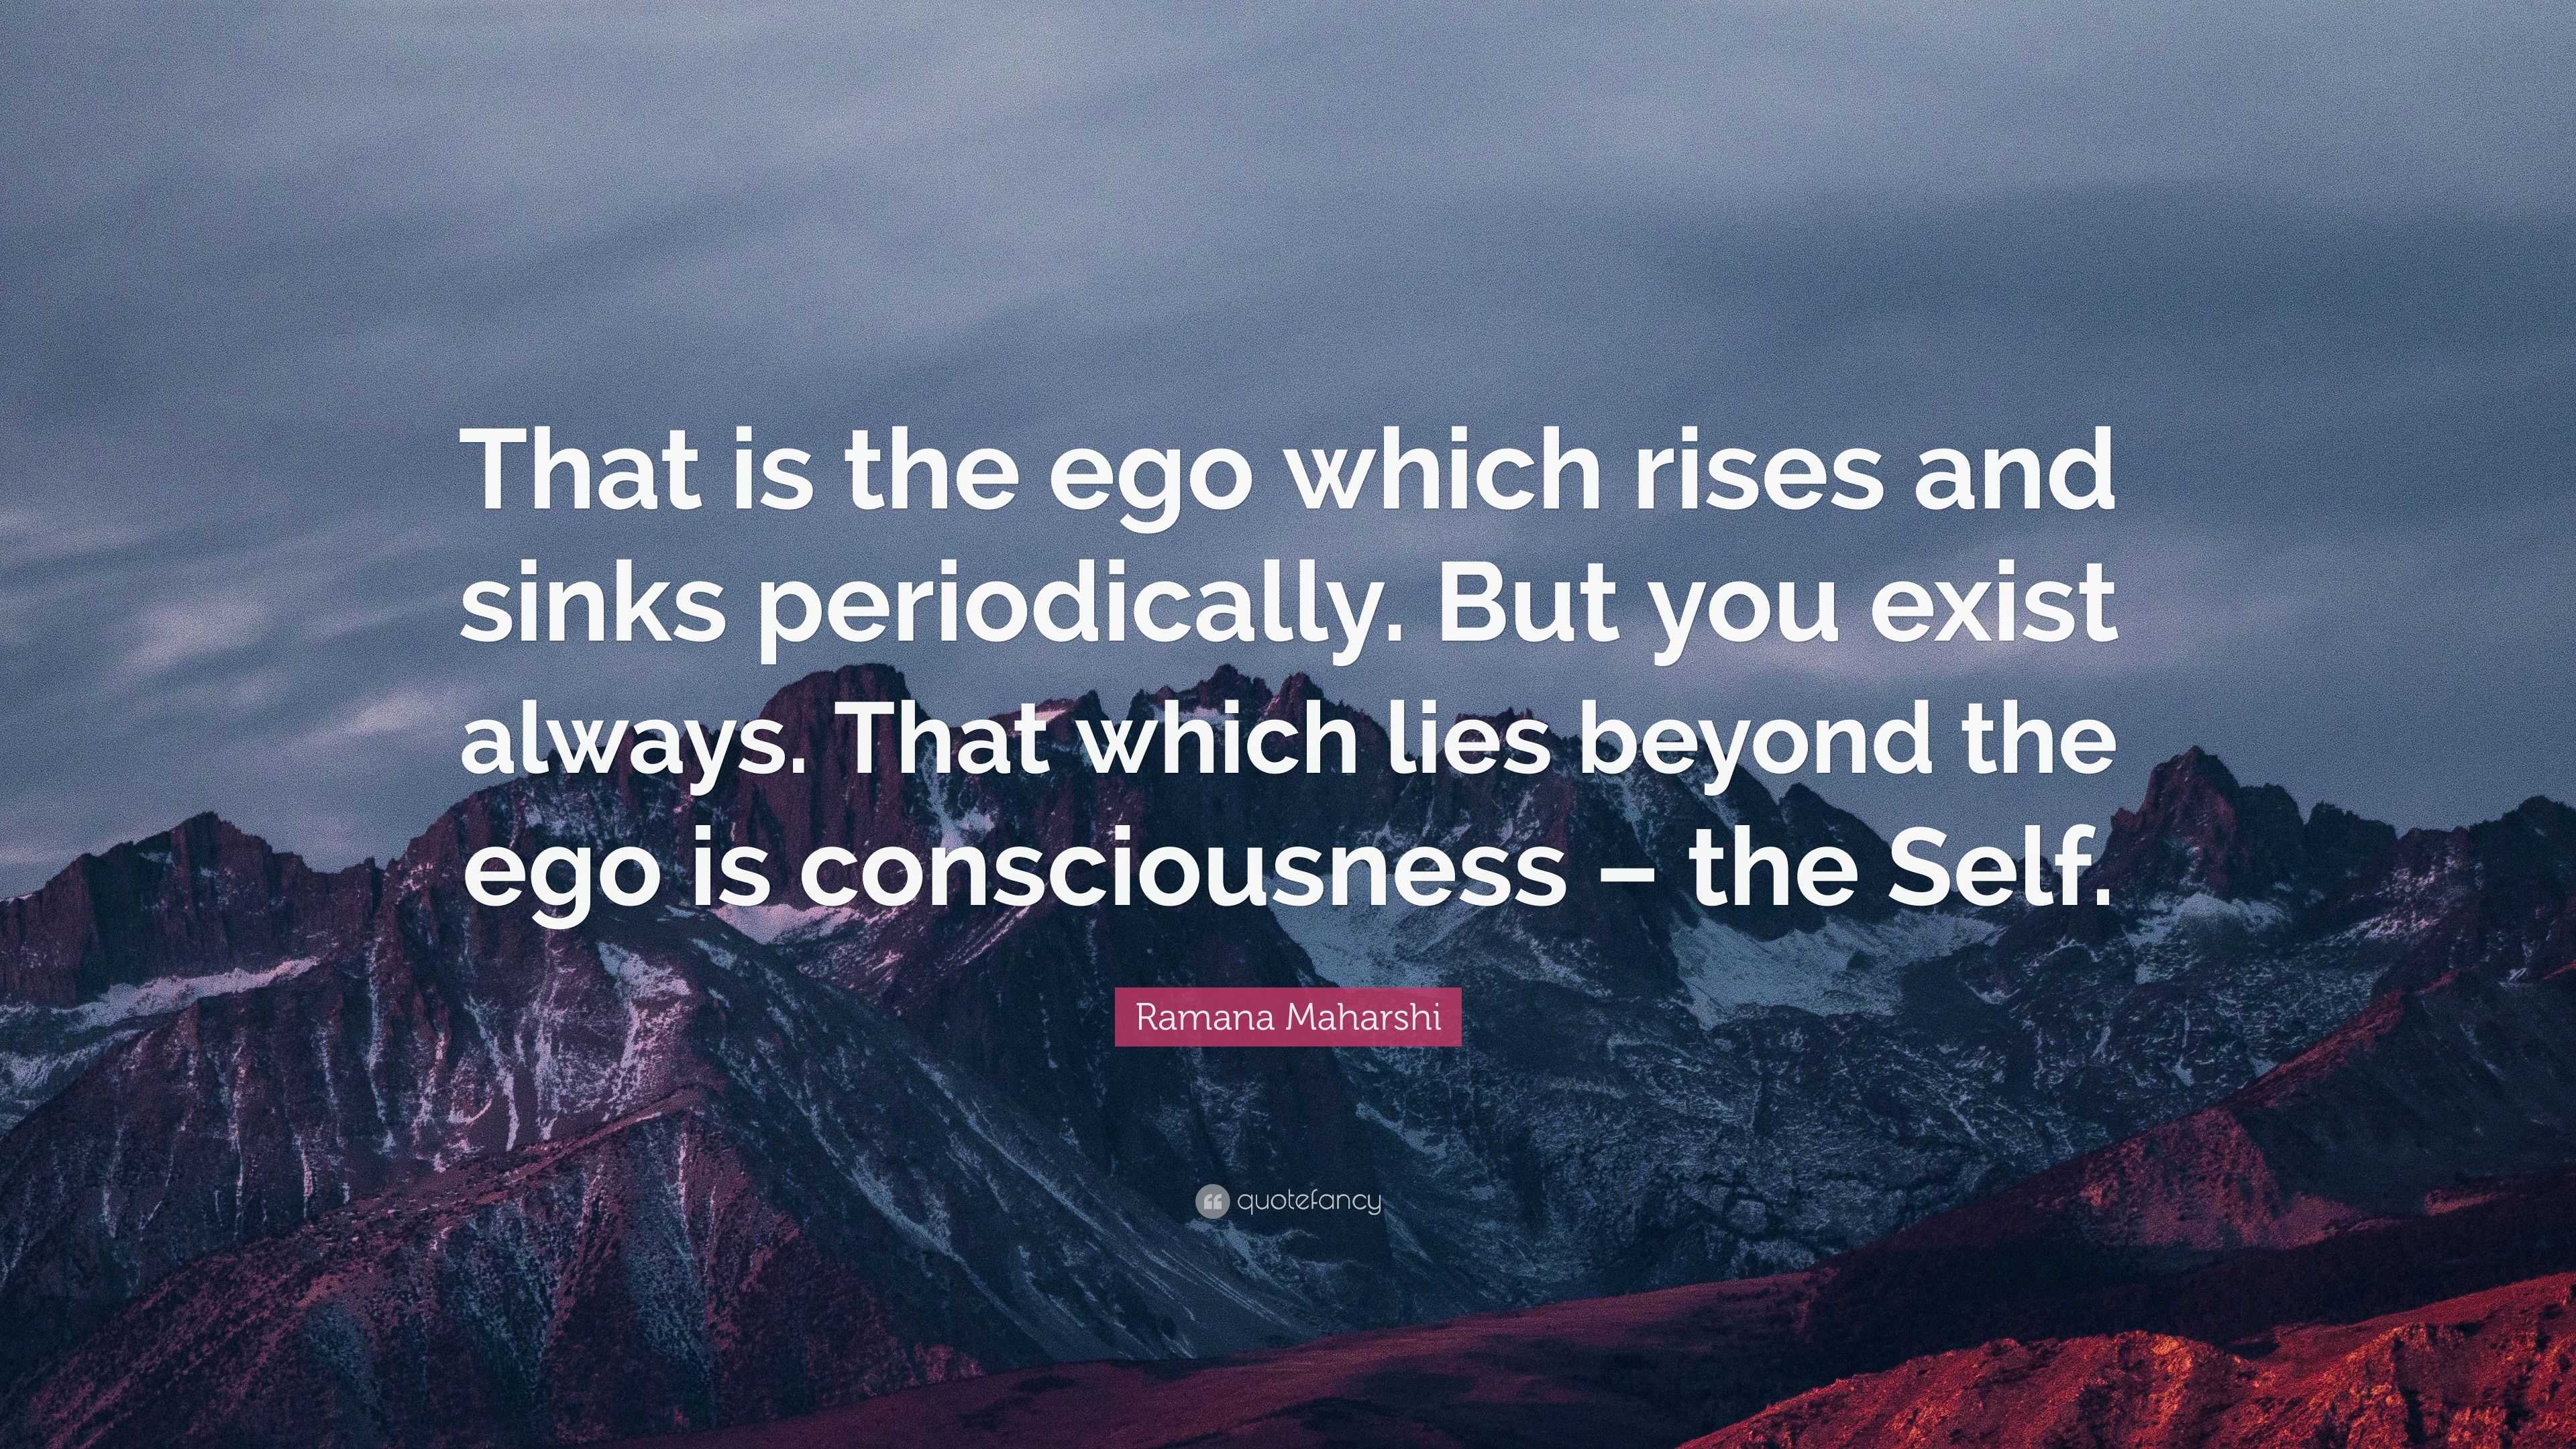 Ramana Maharshi Quote: “That is the ego which rises and sinks periodically.  But you exist always. That which lies beyond the ego is consciousnes...”